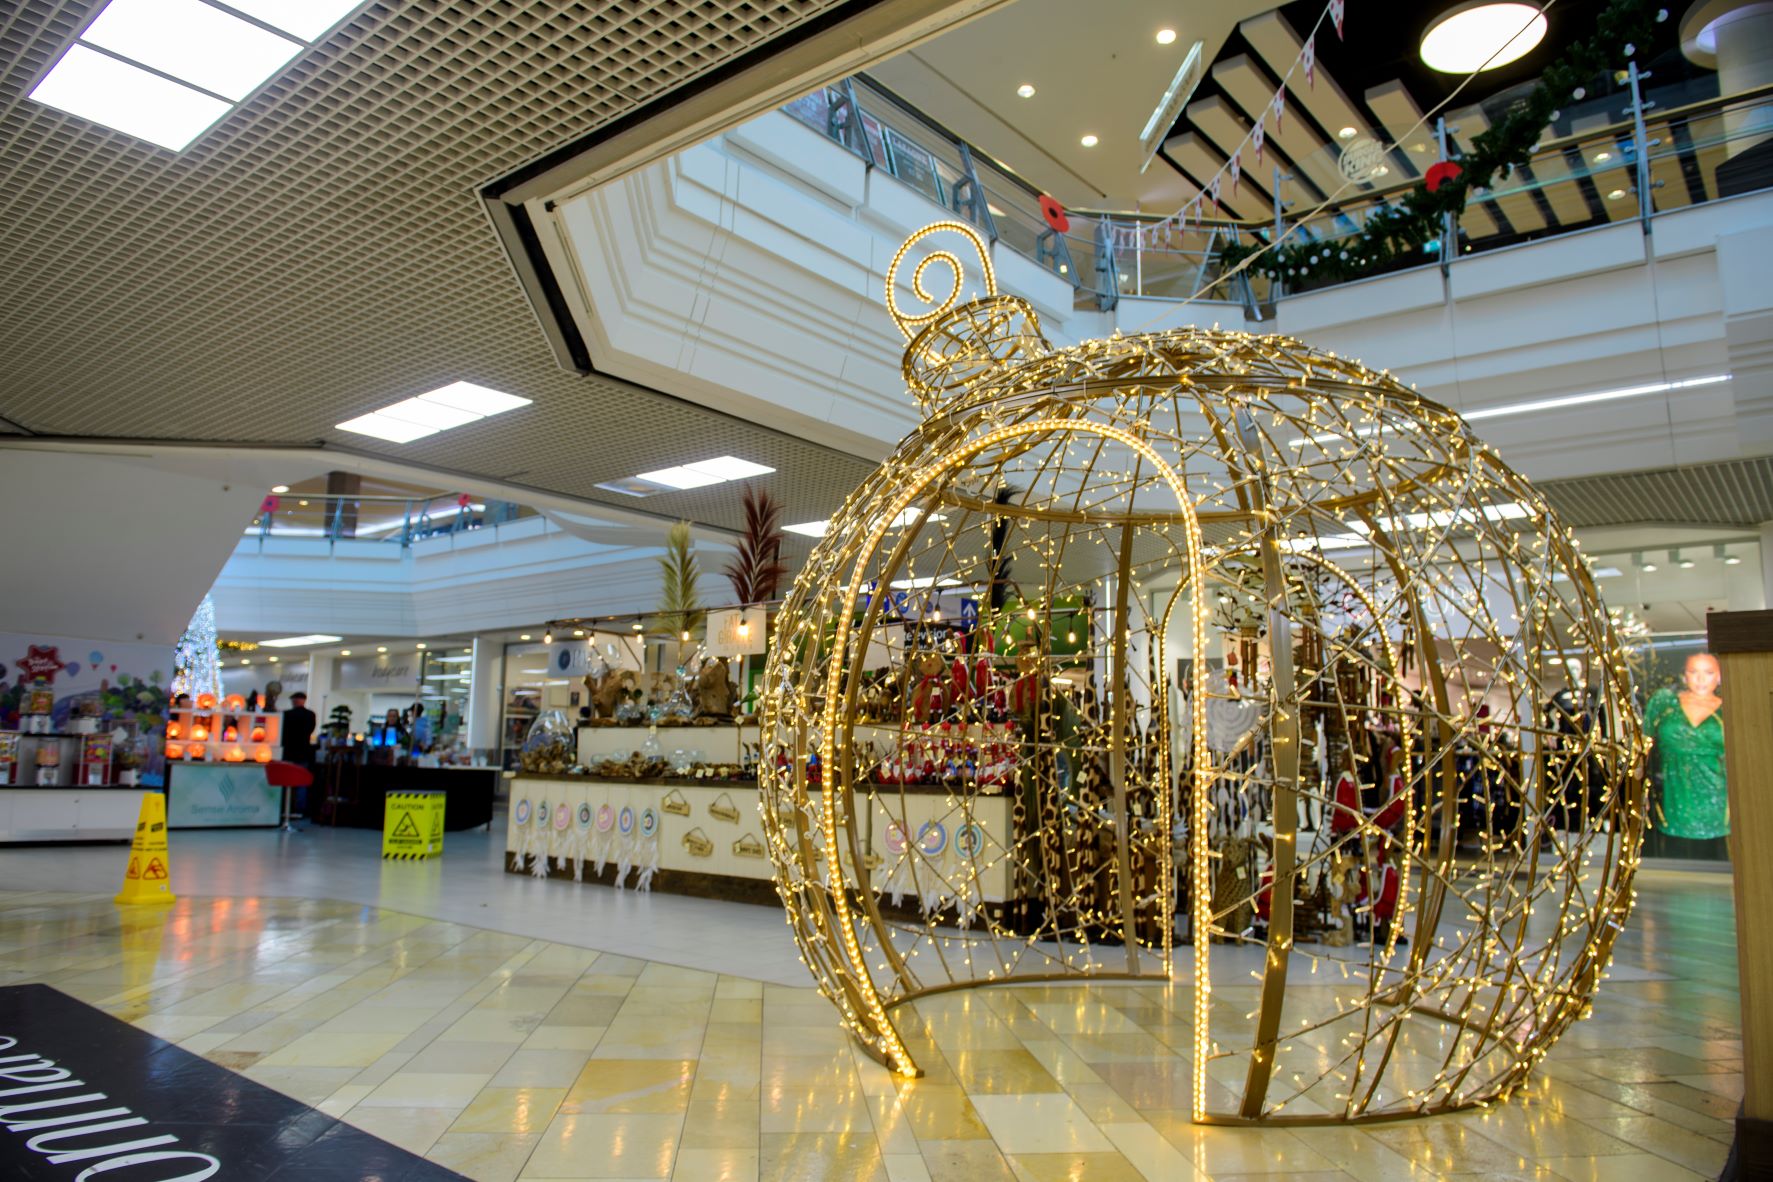 Light-up gold bauble motif displayed at The Galleries Shopping Centre in Bristol.